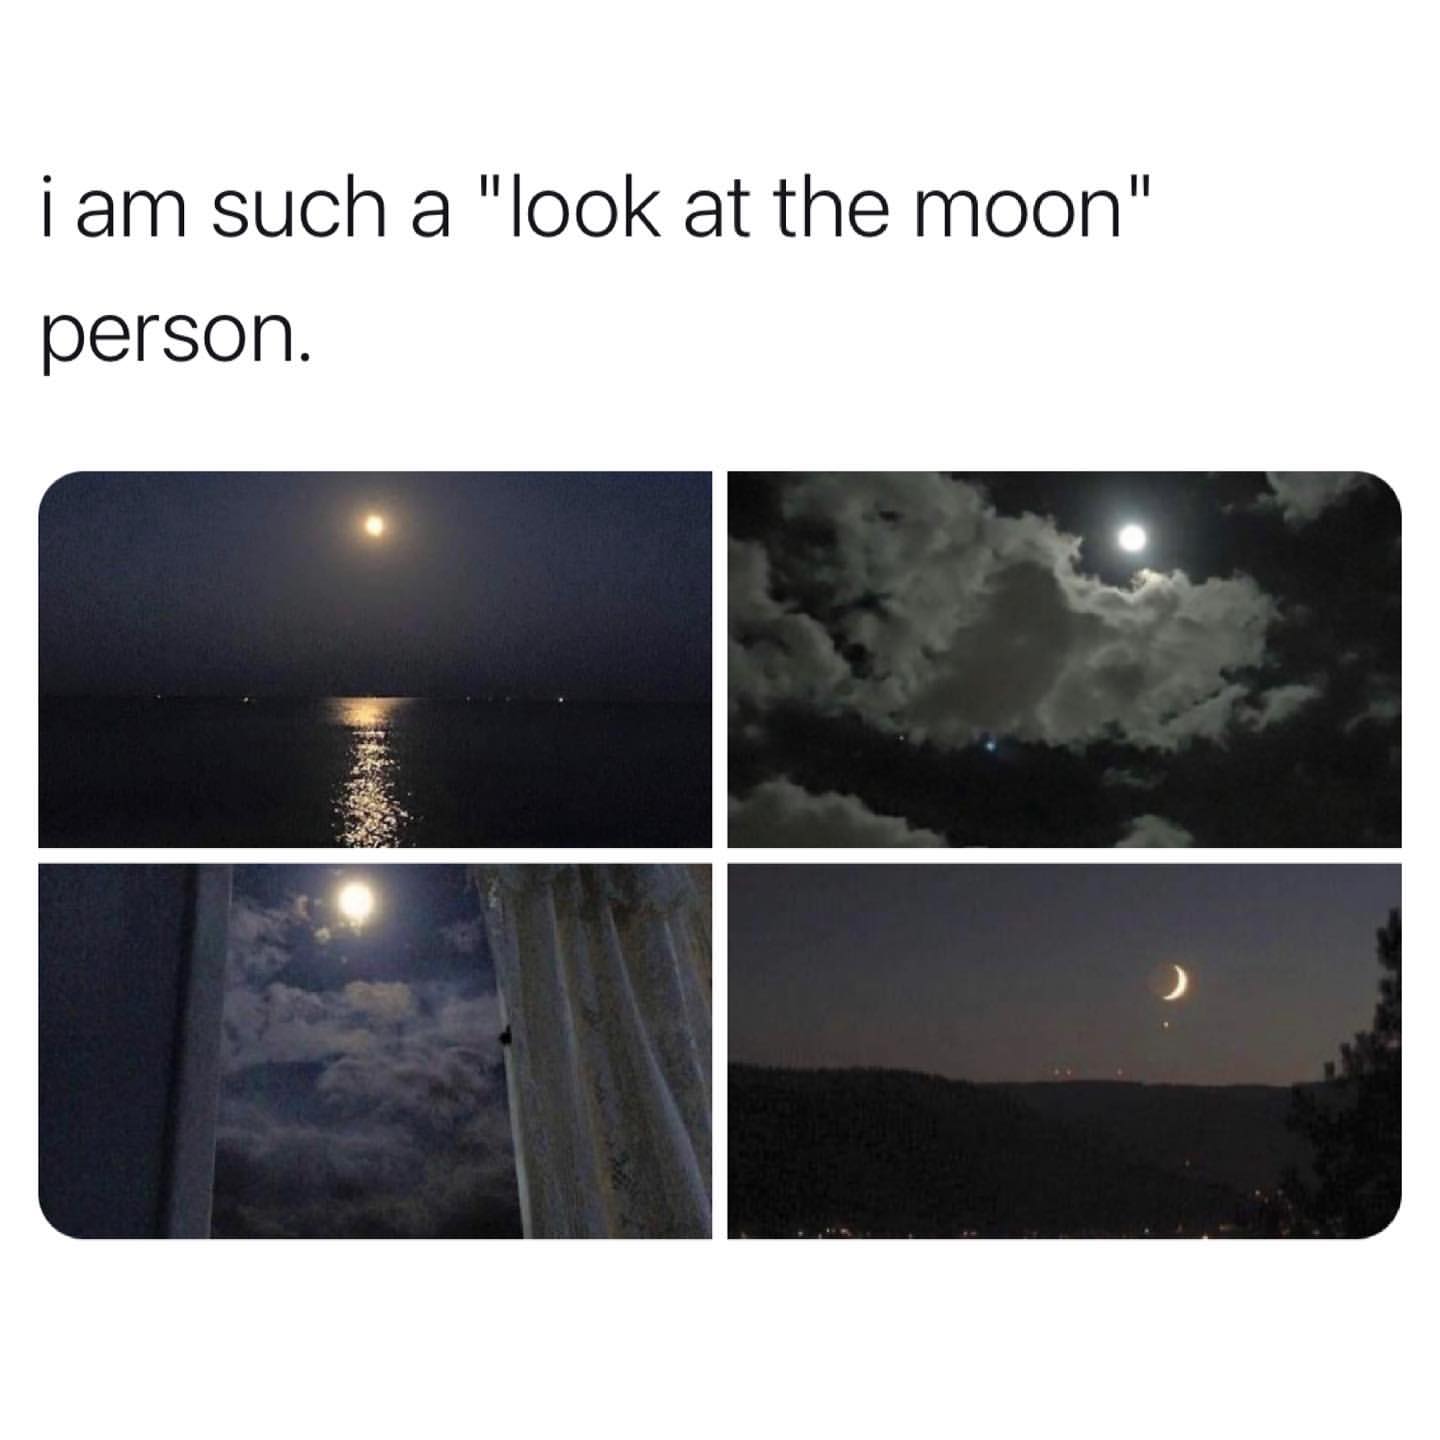 I am such a "look at the moon" person.